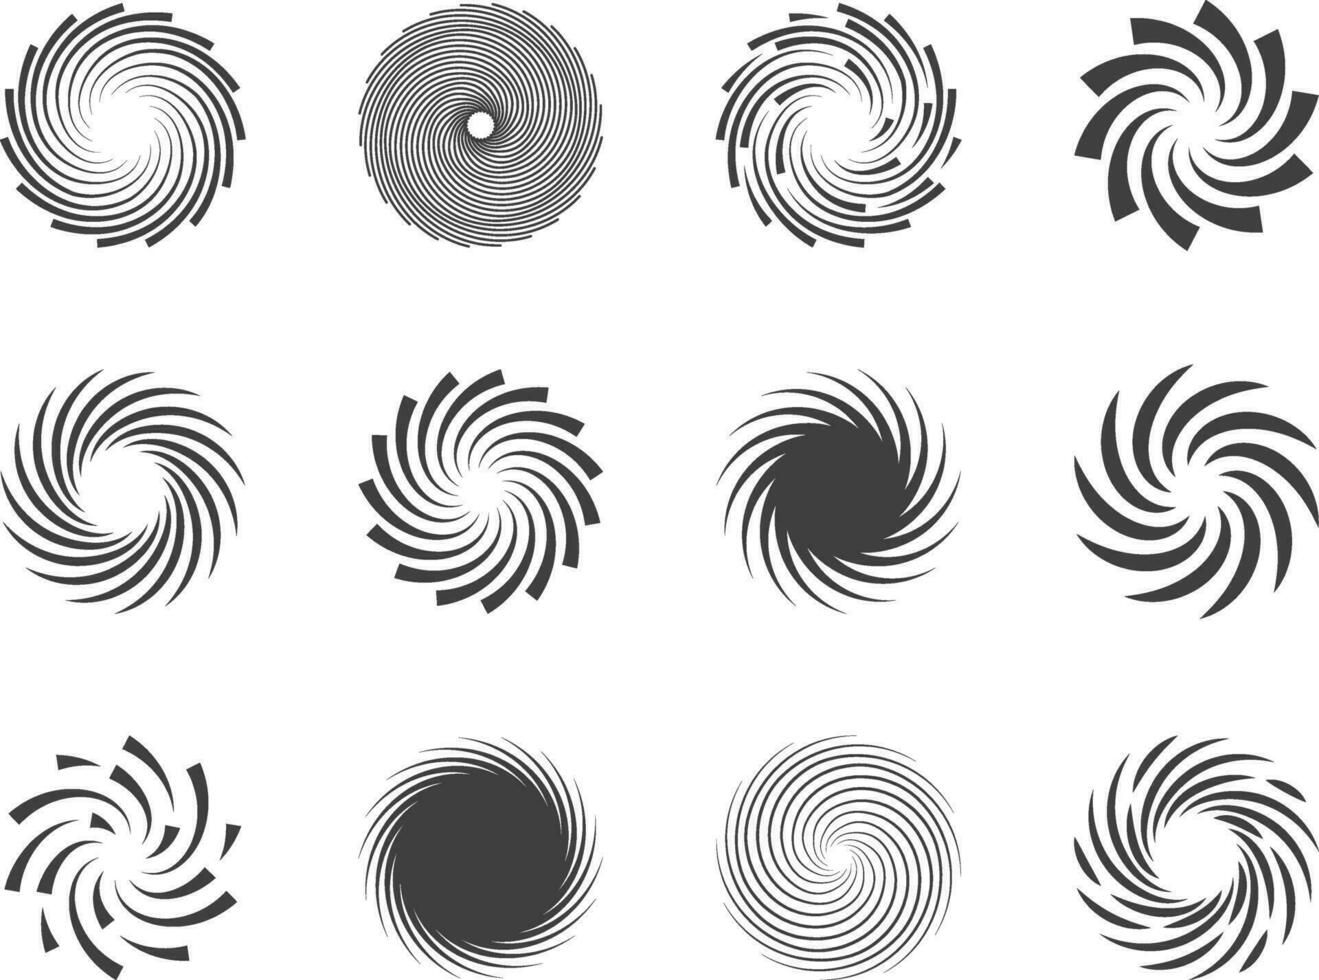 Spiral and swirl motion twisting circles design element set vector